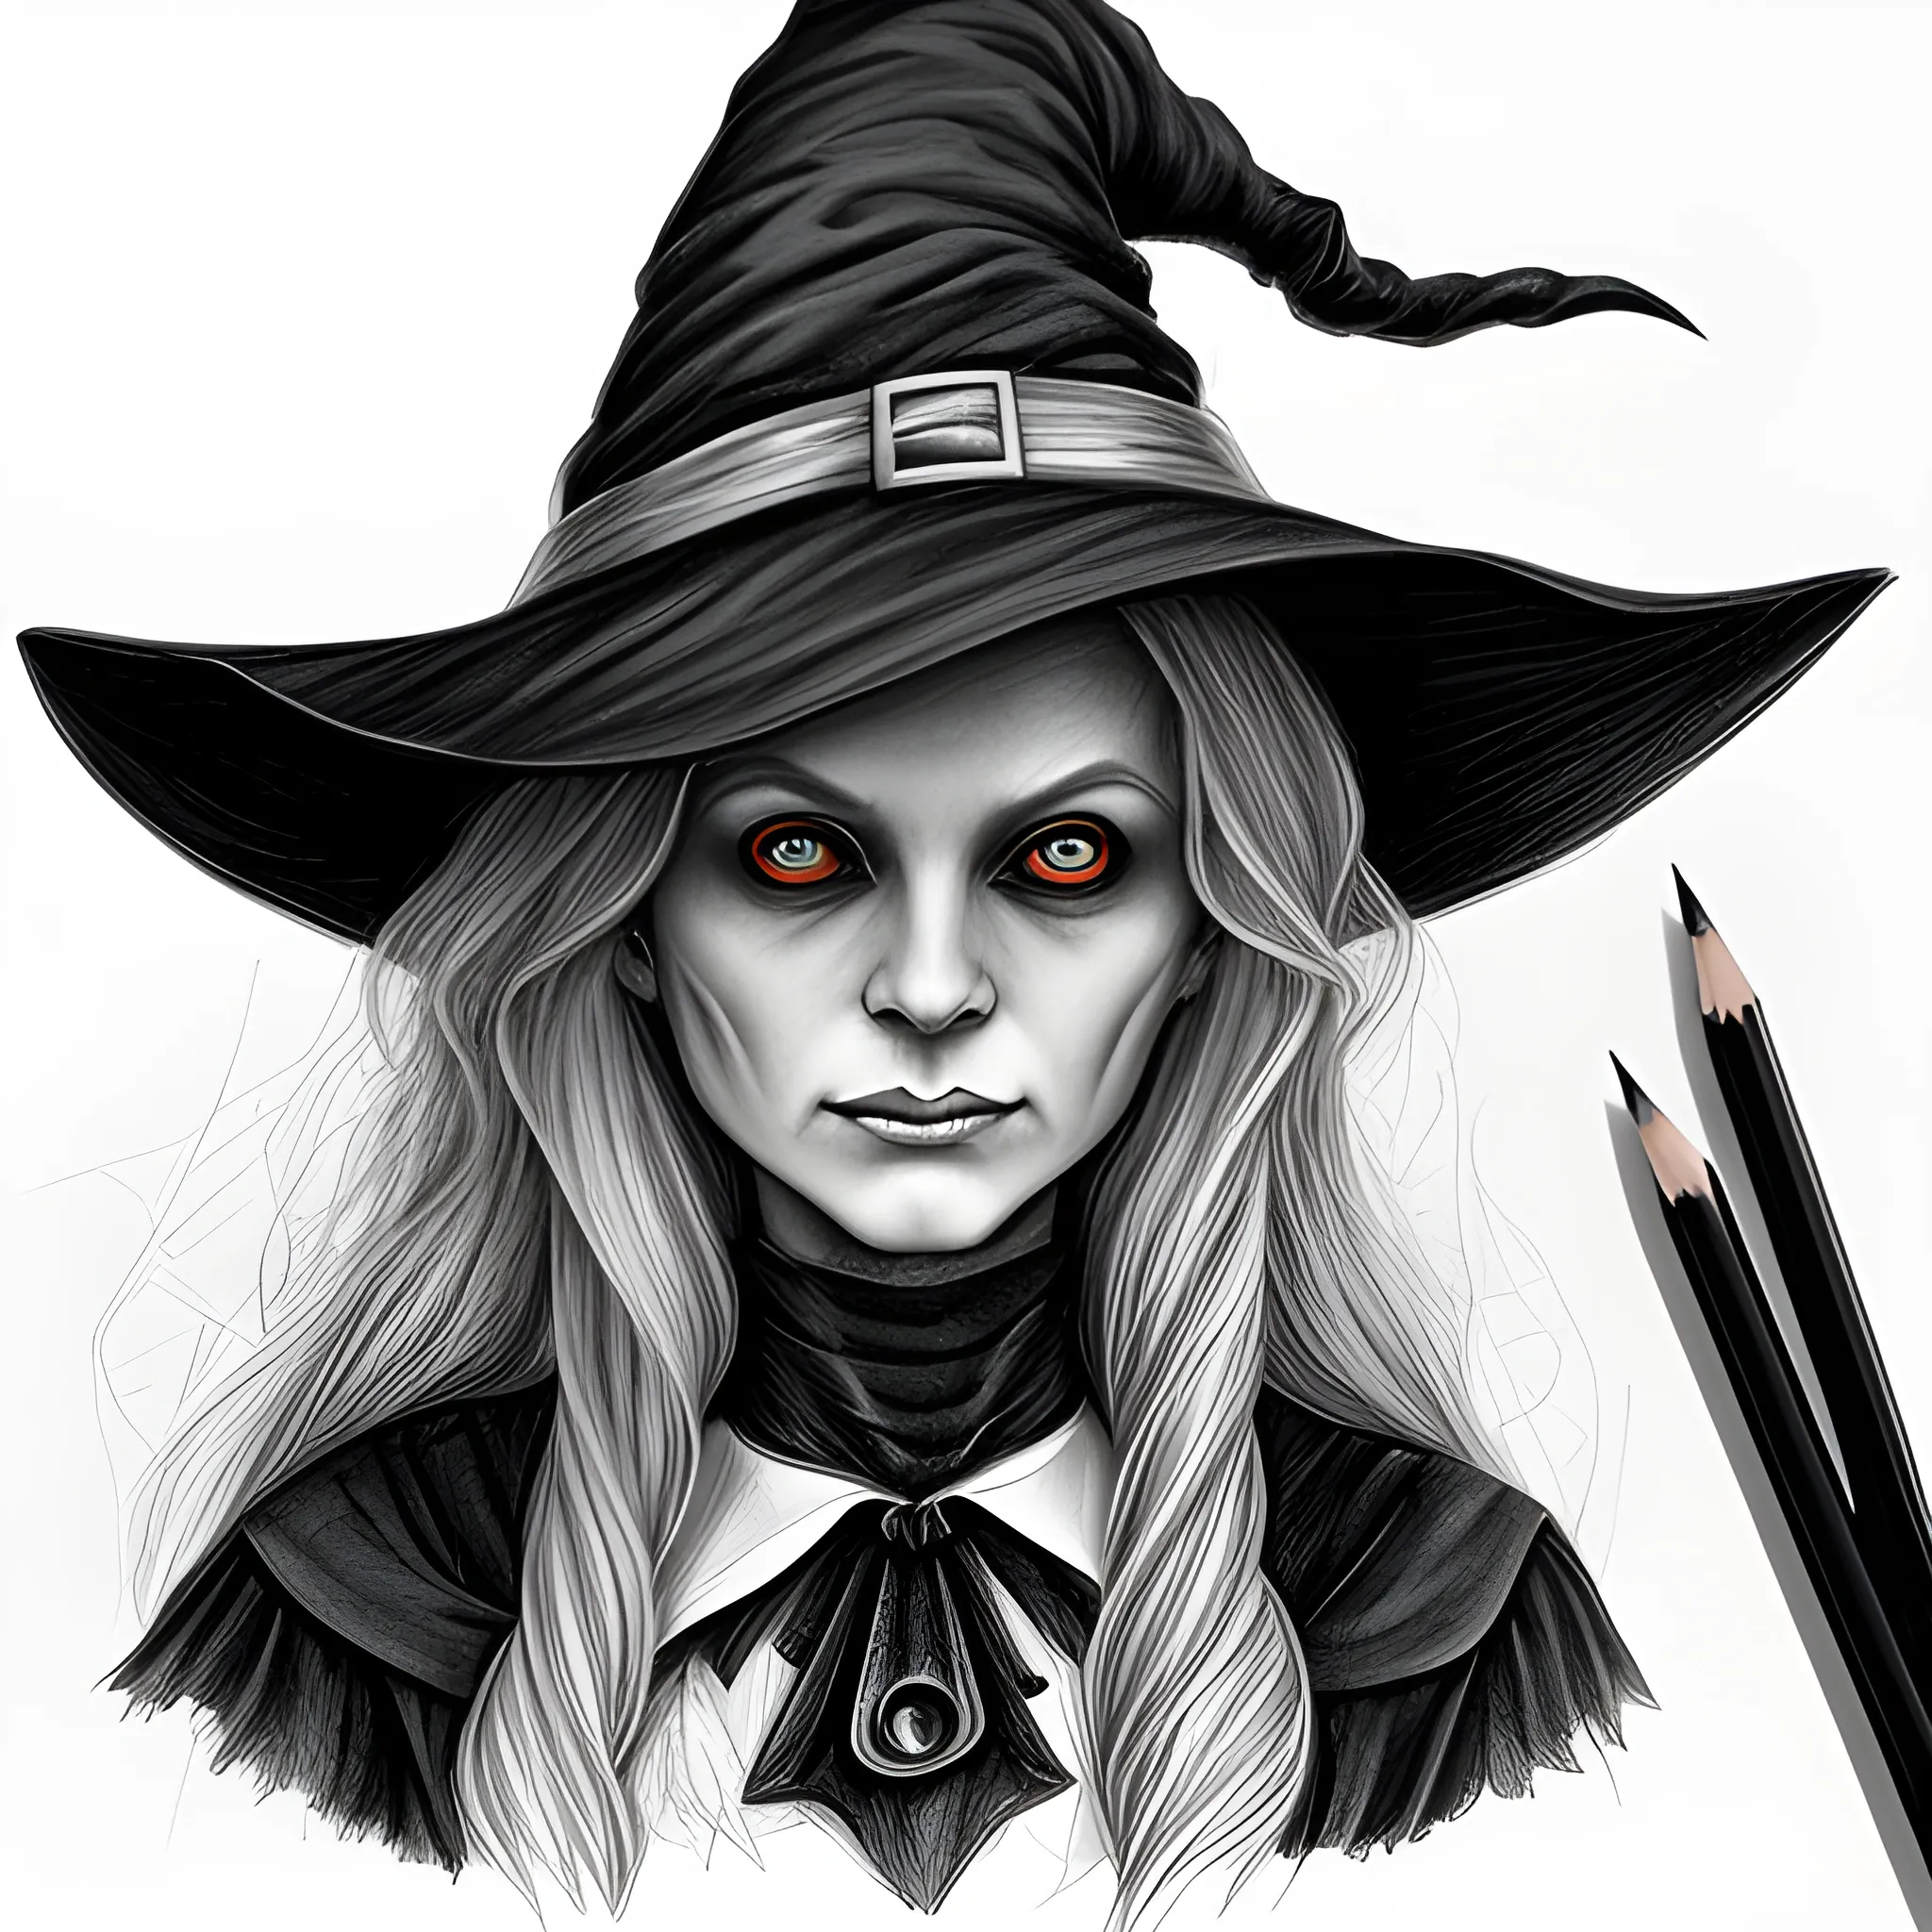 Cartoon Witch Drawing - How To Draw A Cartoon Witch Step By Step